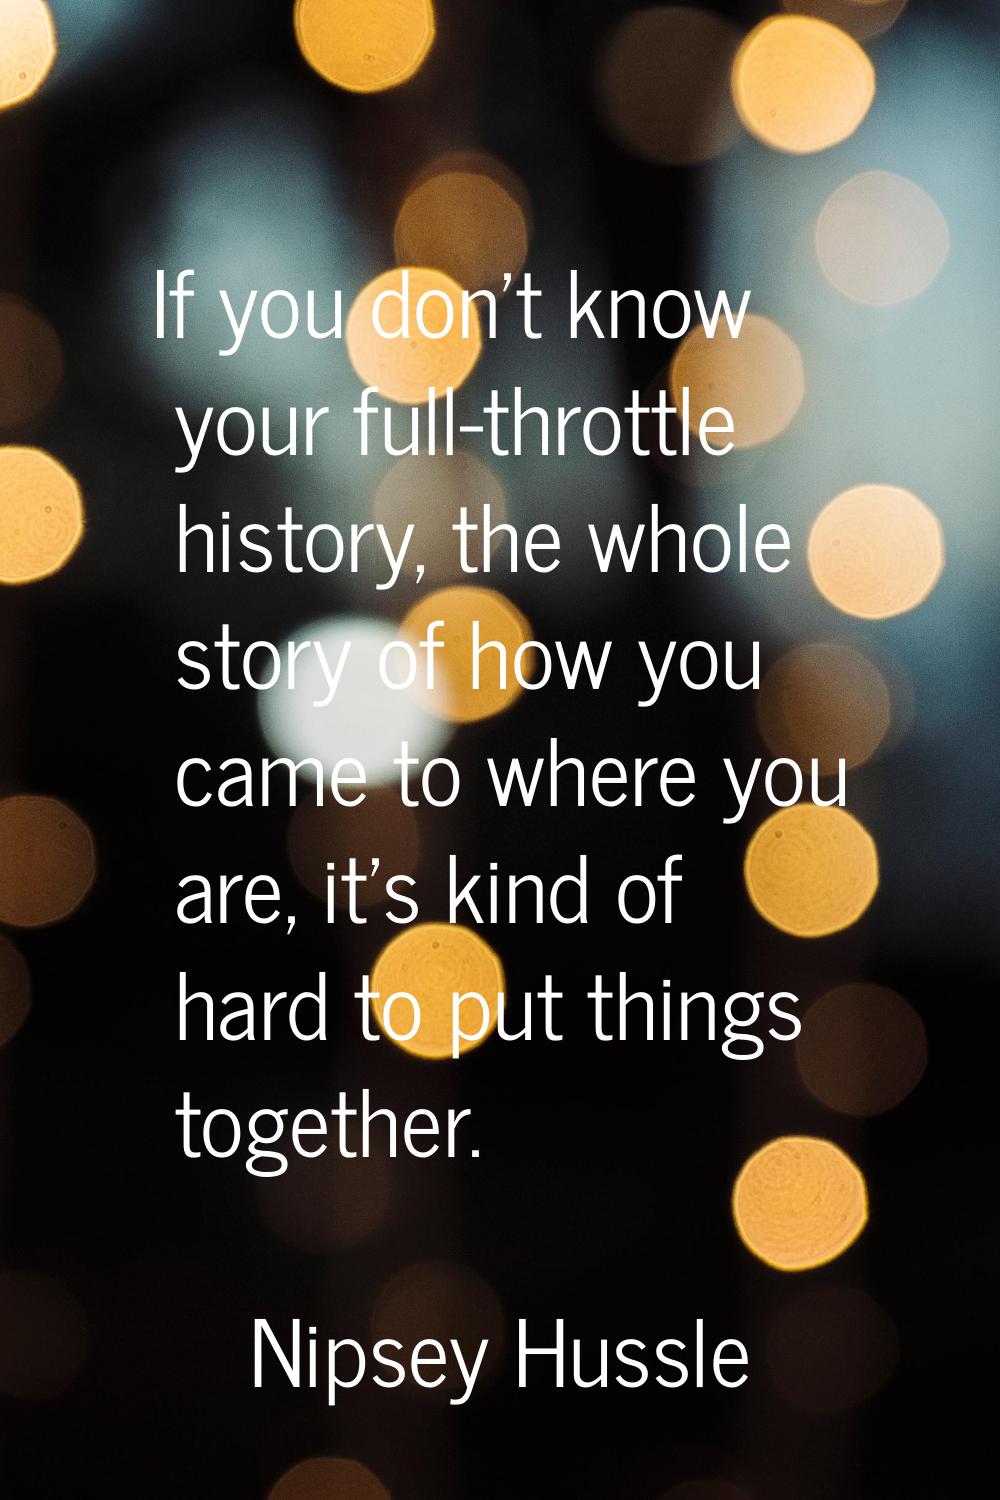 If you don't know your full-throttle history, the whole story of how you came to where you are, it'